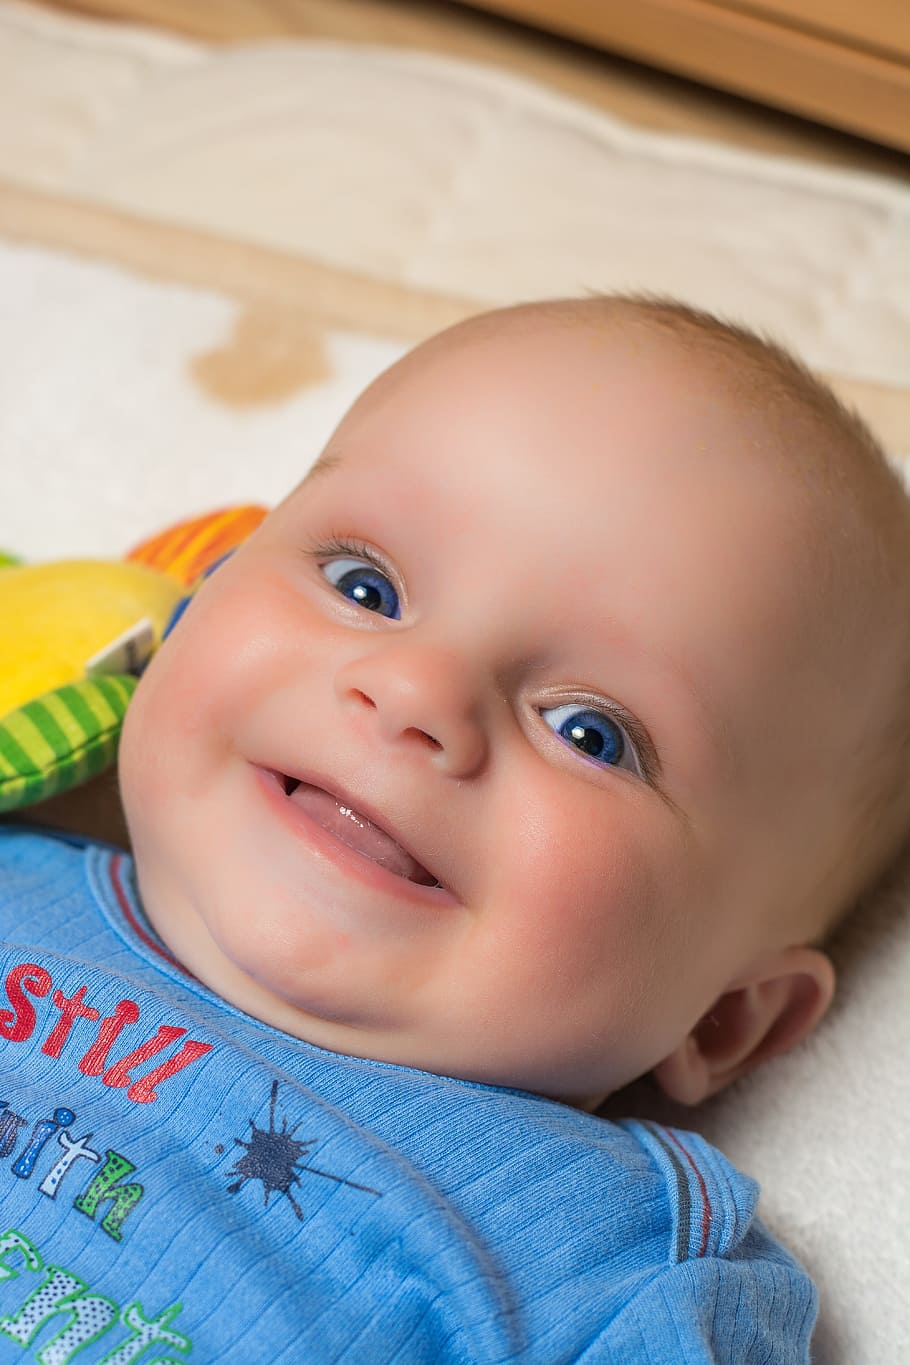 smiling baby lying on bed, child, small child, face, cute, boy